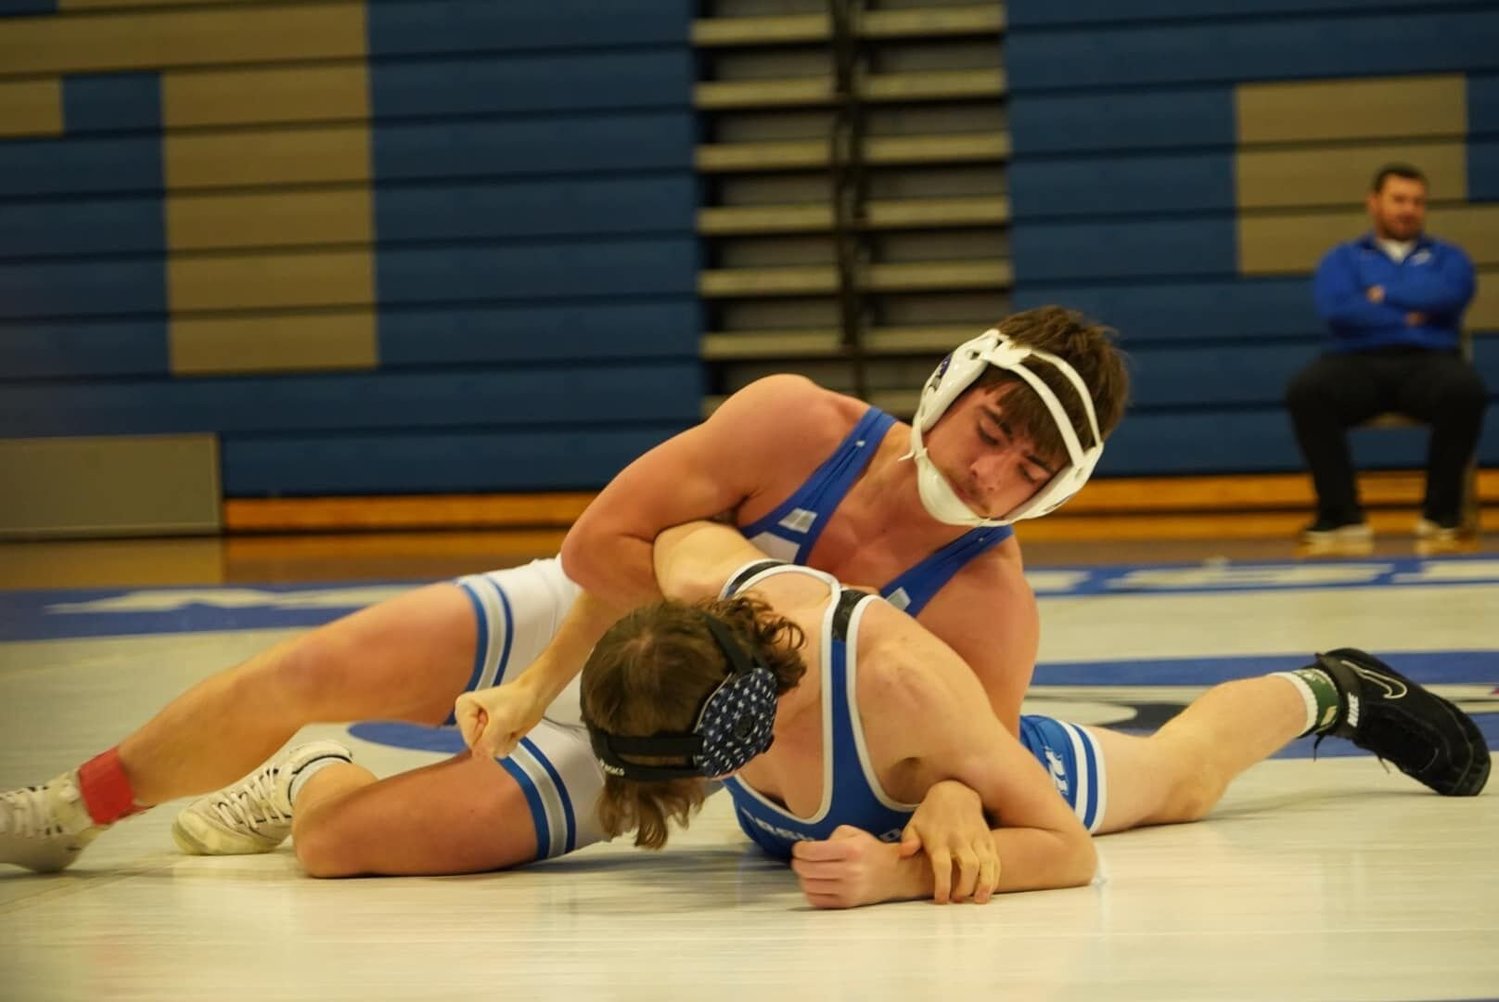 “We feel pretty good going into our first competitions next week,” expressed boys wrestling head coach Matt Holt. “Our leaders have really stepped up and we have had a great first two weeks of practice. We are really excited to put our talents on display.” In white: Junior M.J. Gritts. In blue: Junior Keelan Stewart. Members of the community can watch the boy wrestle in West Plains 12/1 and Bolivar on 12/3.